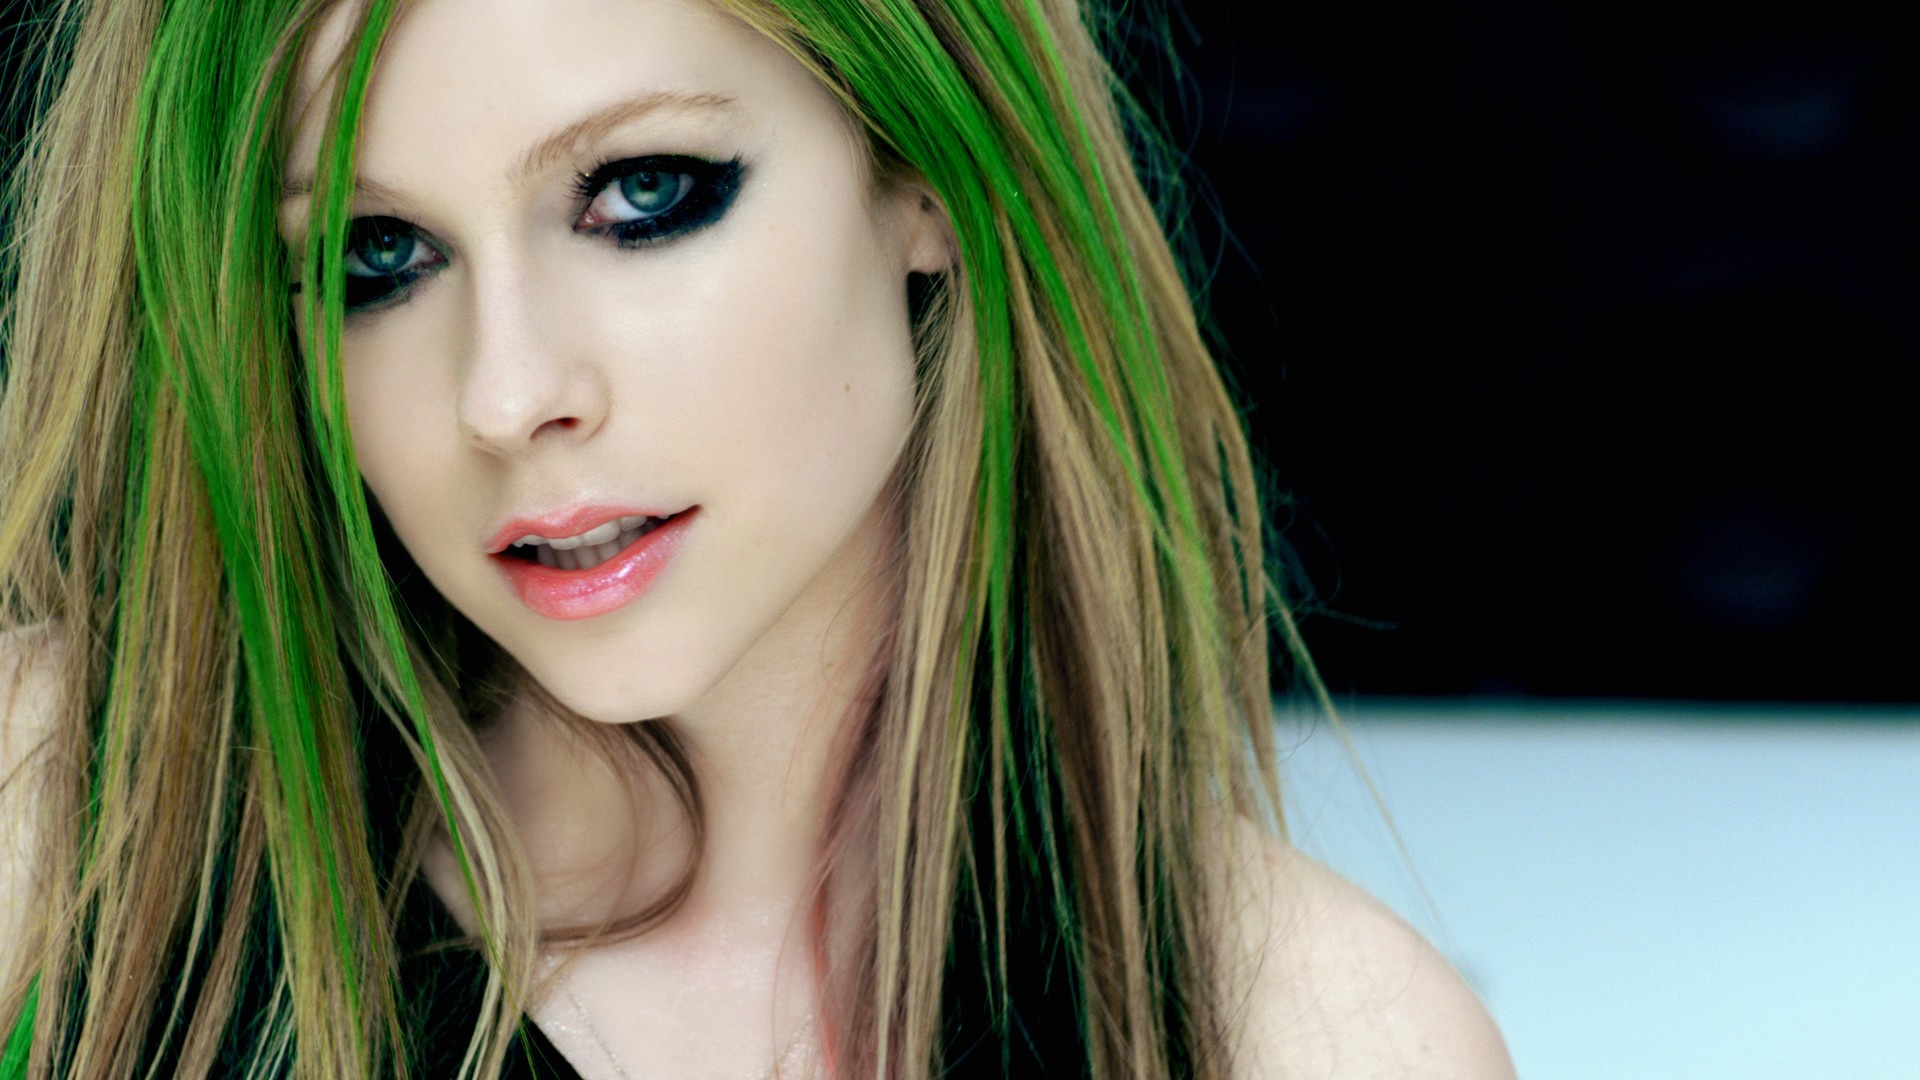 Sweet Avril Lavigne Wallpaper Full HD With